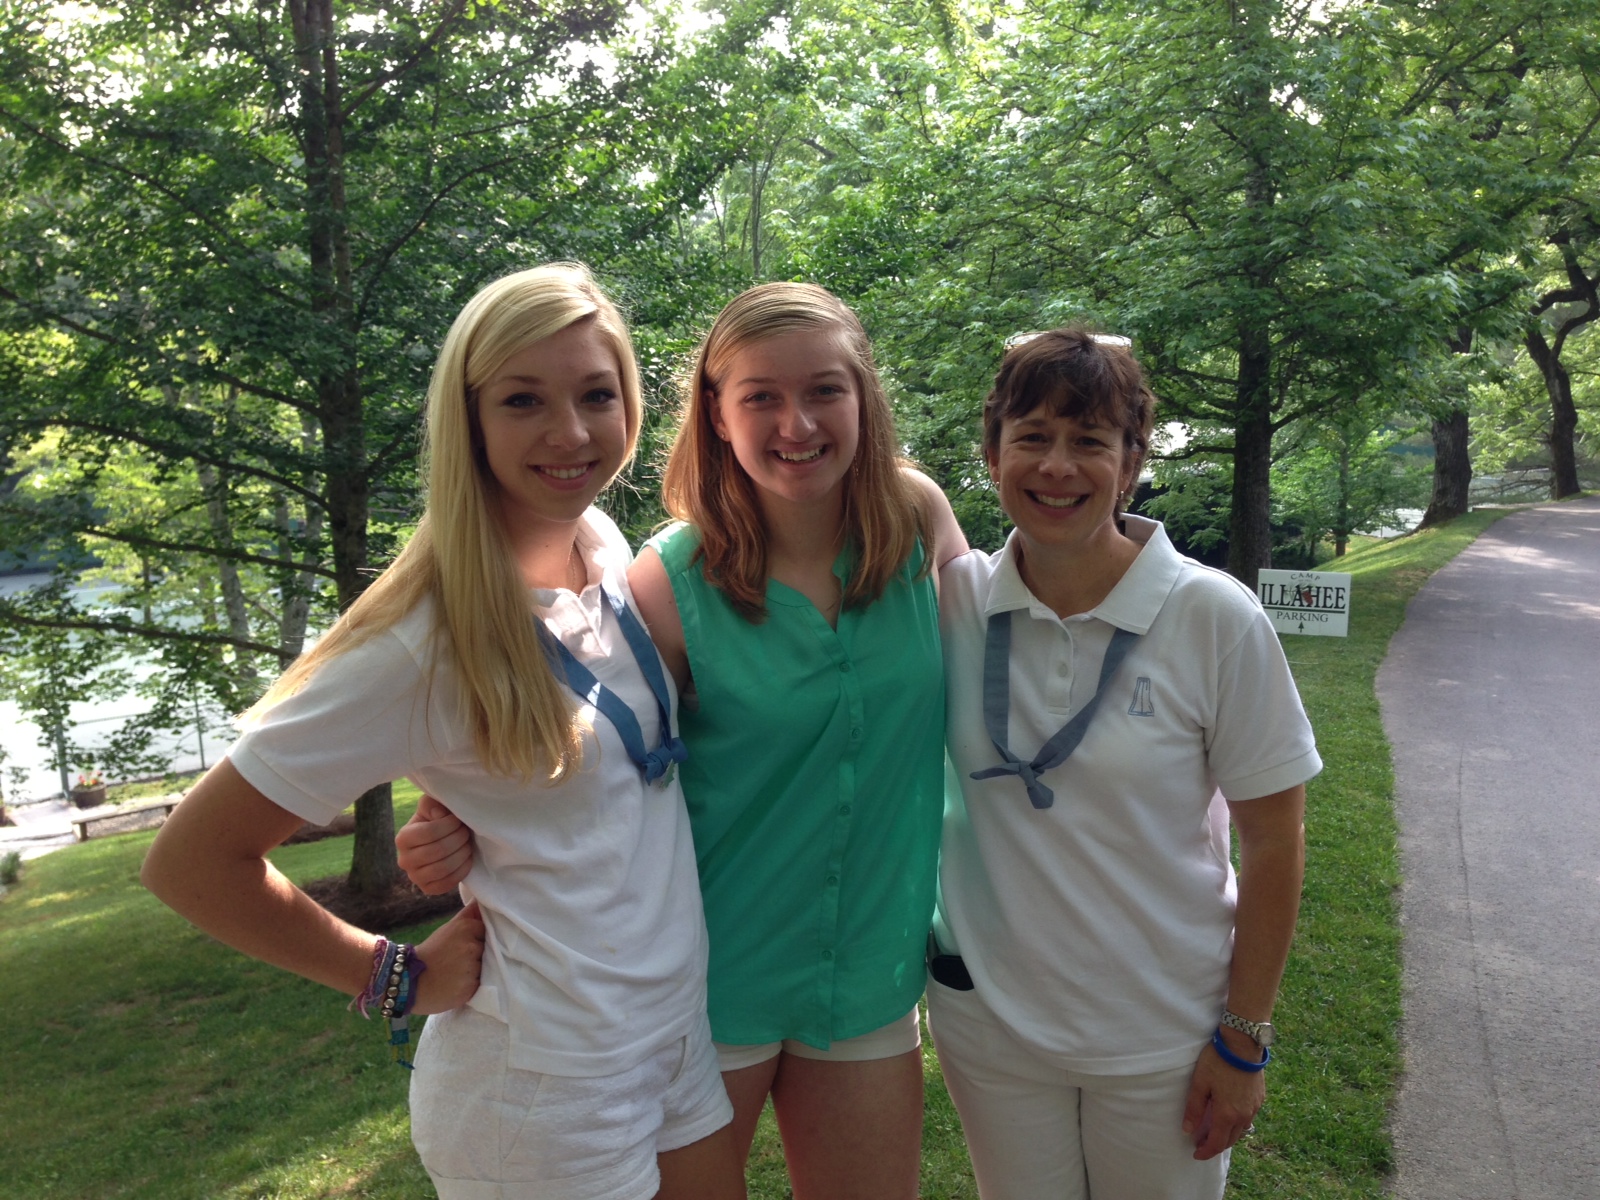 Grace, Liz and Laurie Start Another Great Summer at Illahee.